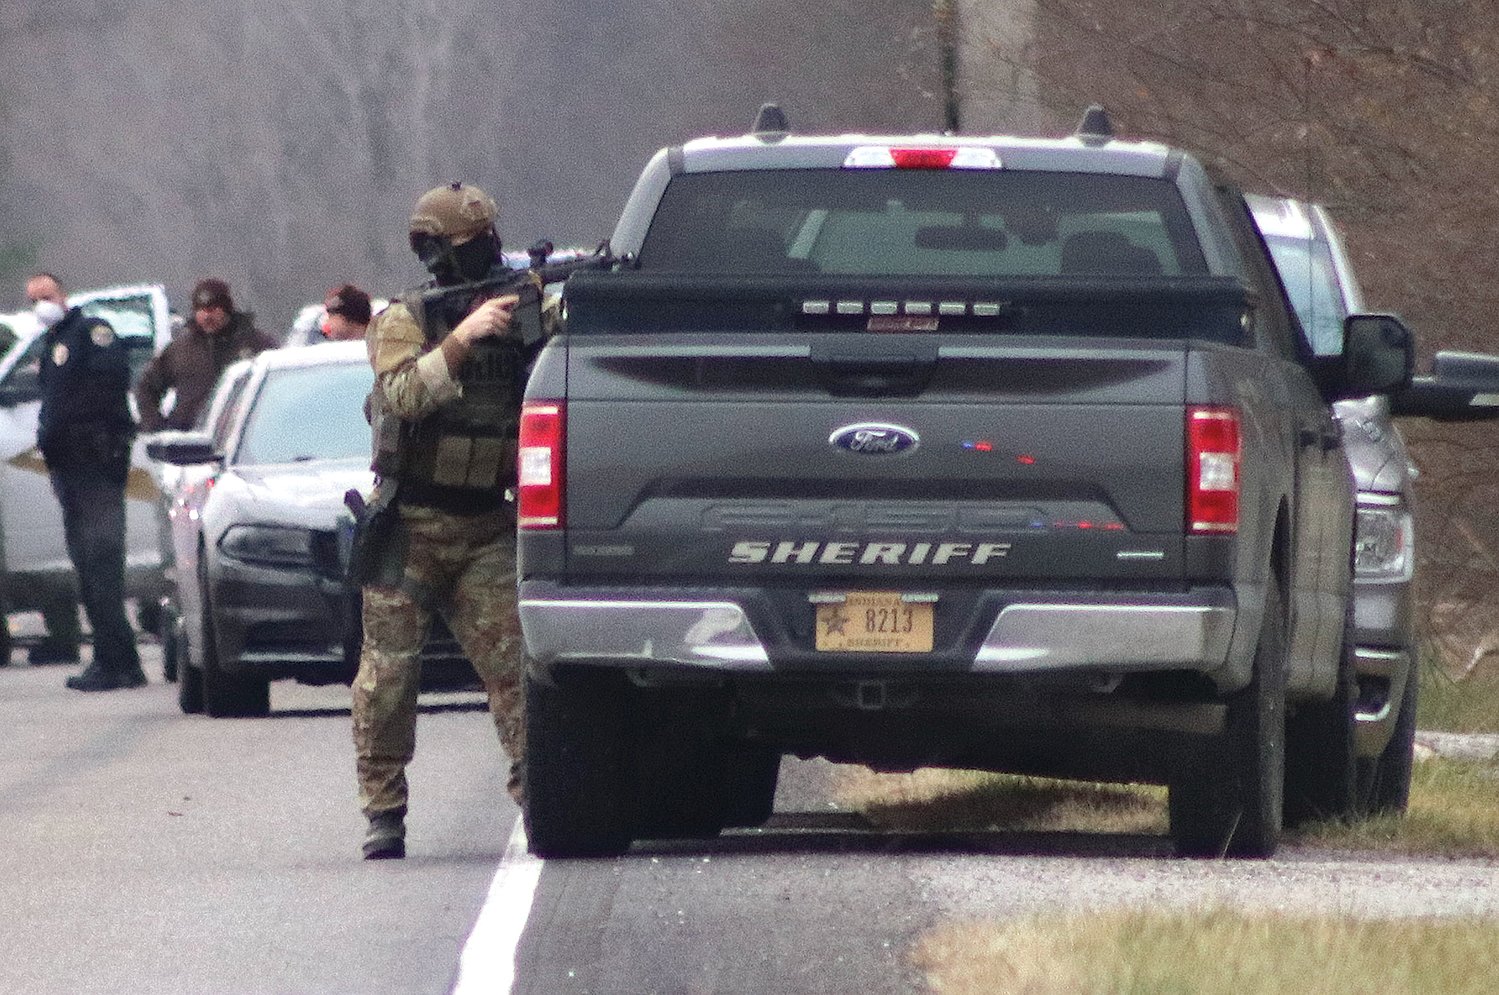 A Crawfordsville man engaged in a seven-hour standoff with police at his home in the 2100 block of North State Road 47 on Dec. 7. The event ended in a police-action shooting that wounded Dillon Gard, 30.